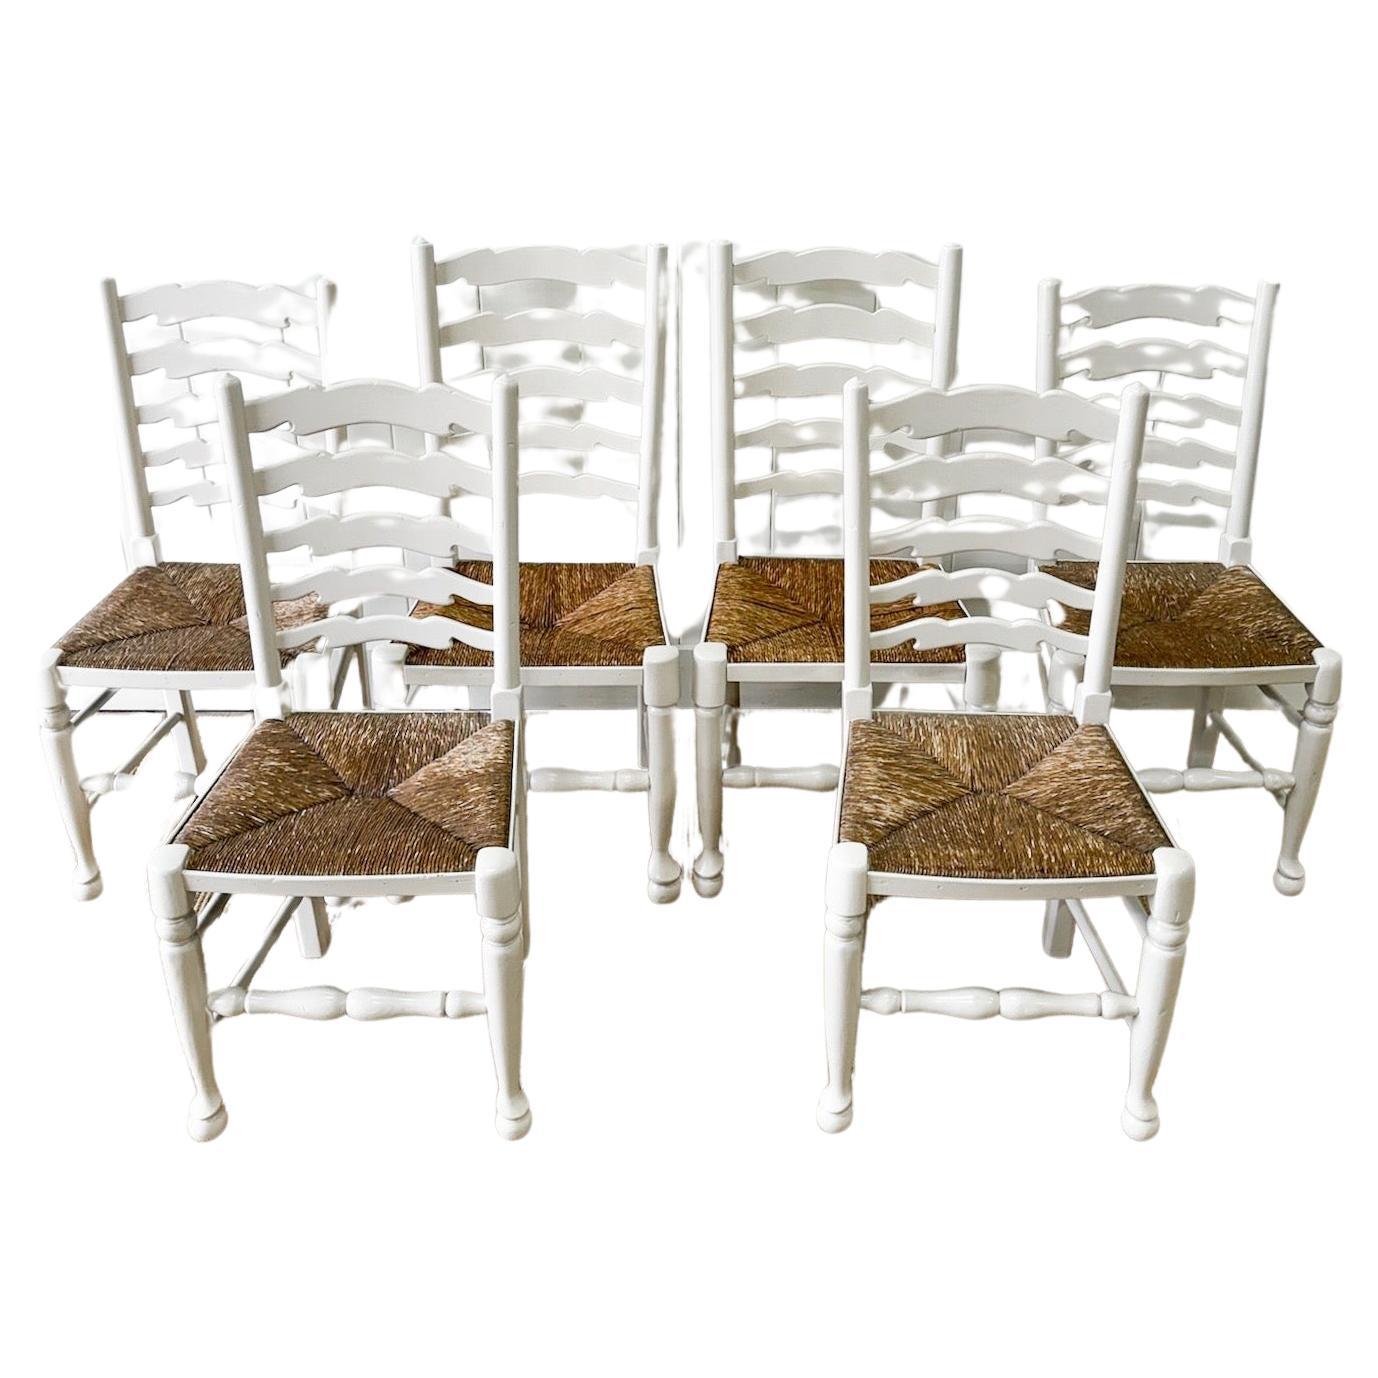 A Harlequin Set of 6 Painted English Ladder Back Chairs For Sale